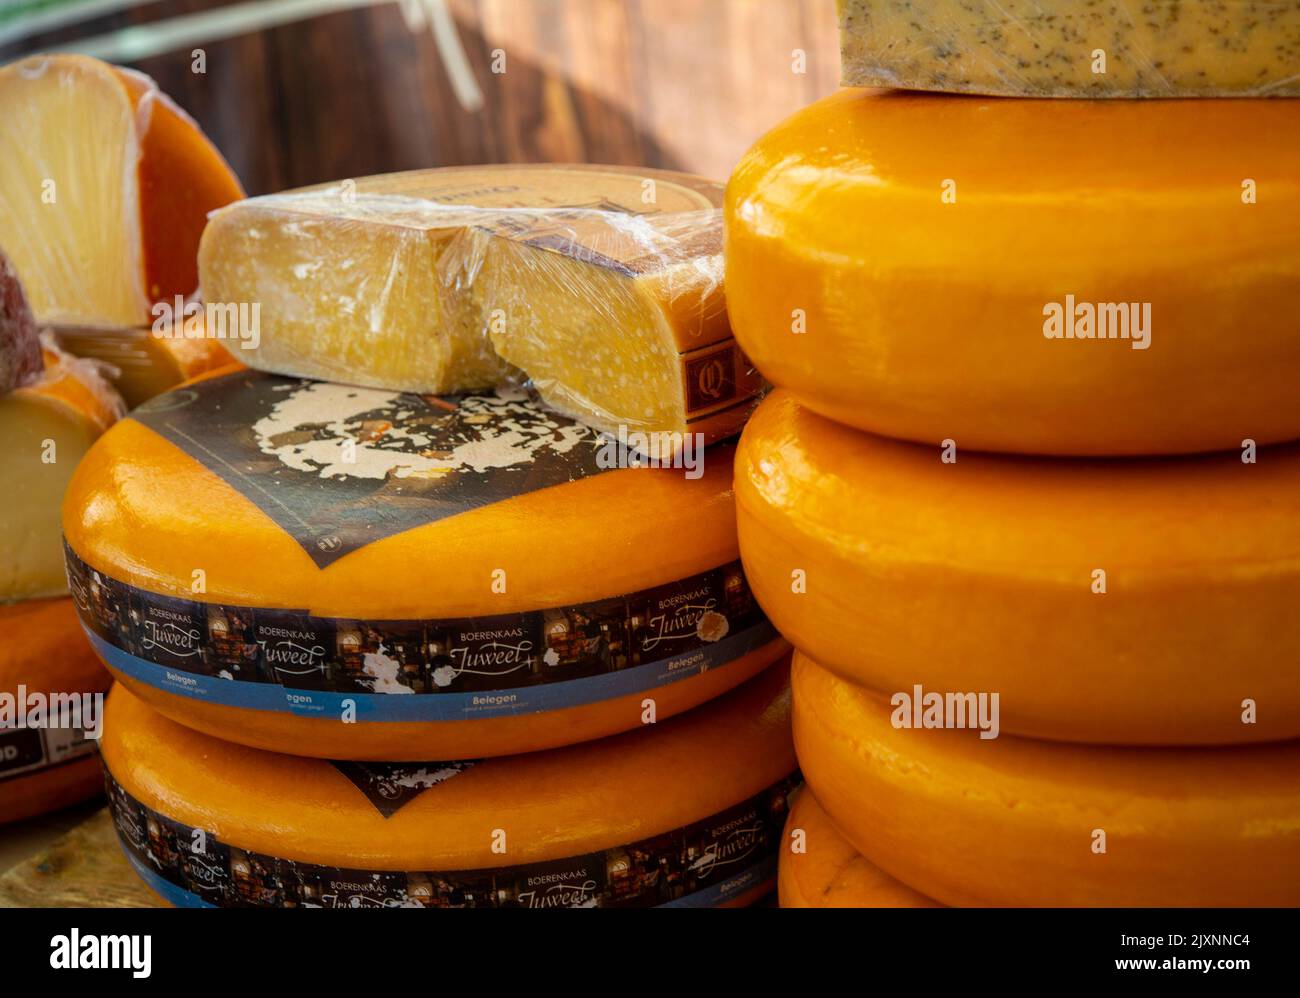 Cheese on display at an outdoor market in Amsterdam Stock Photo